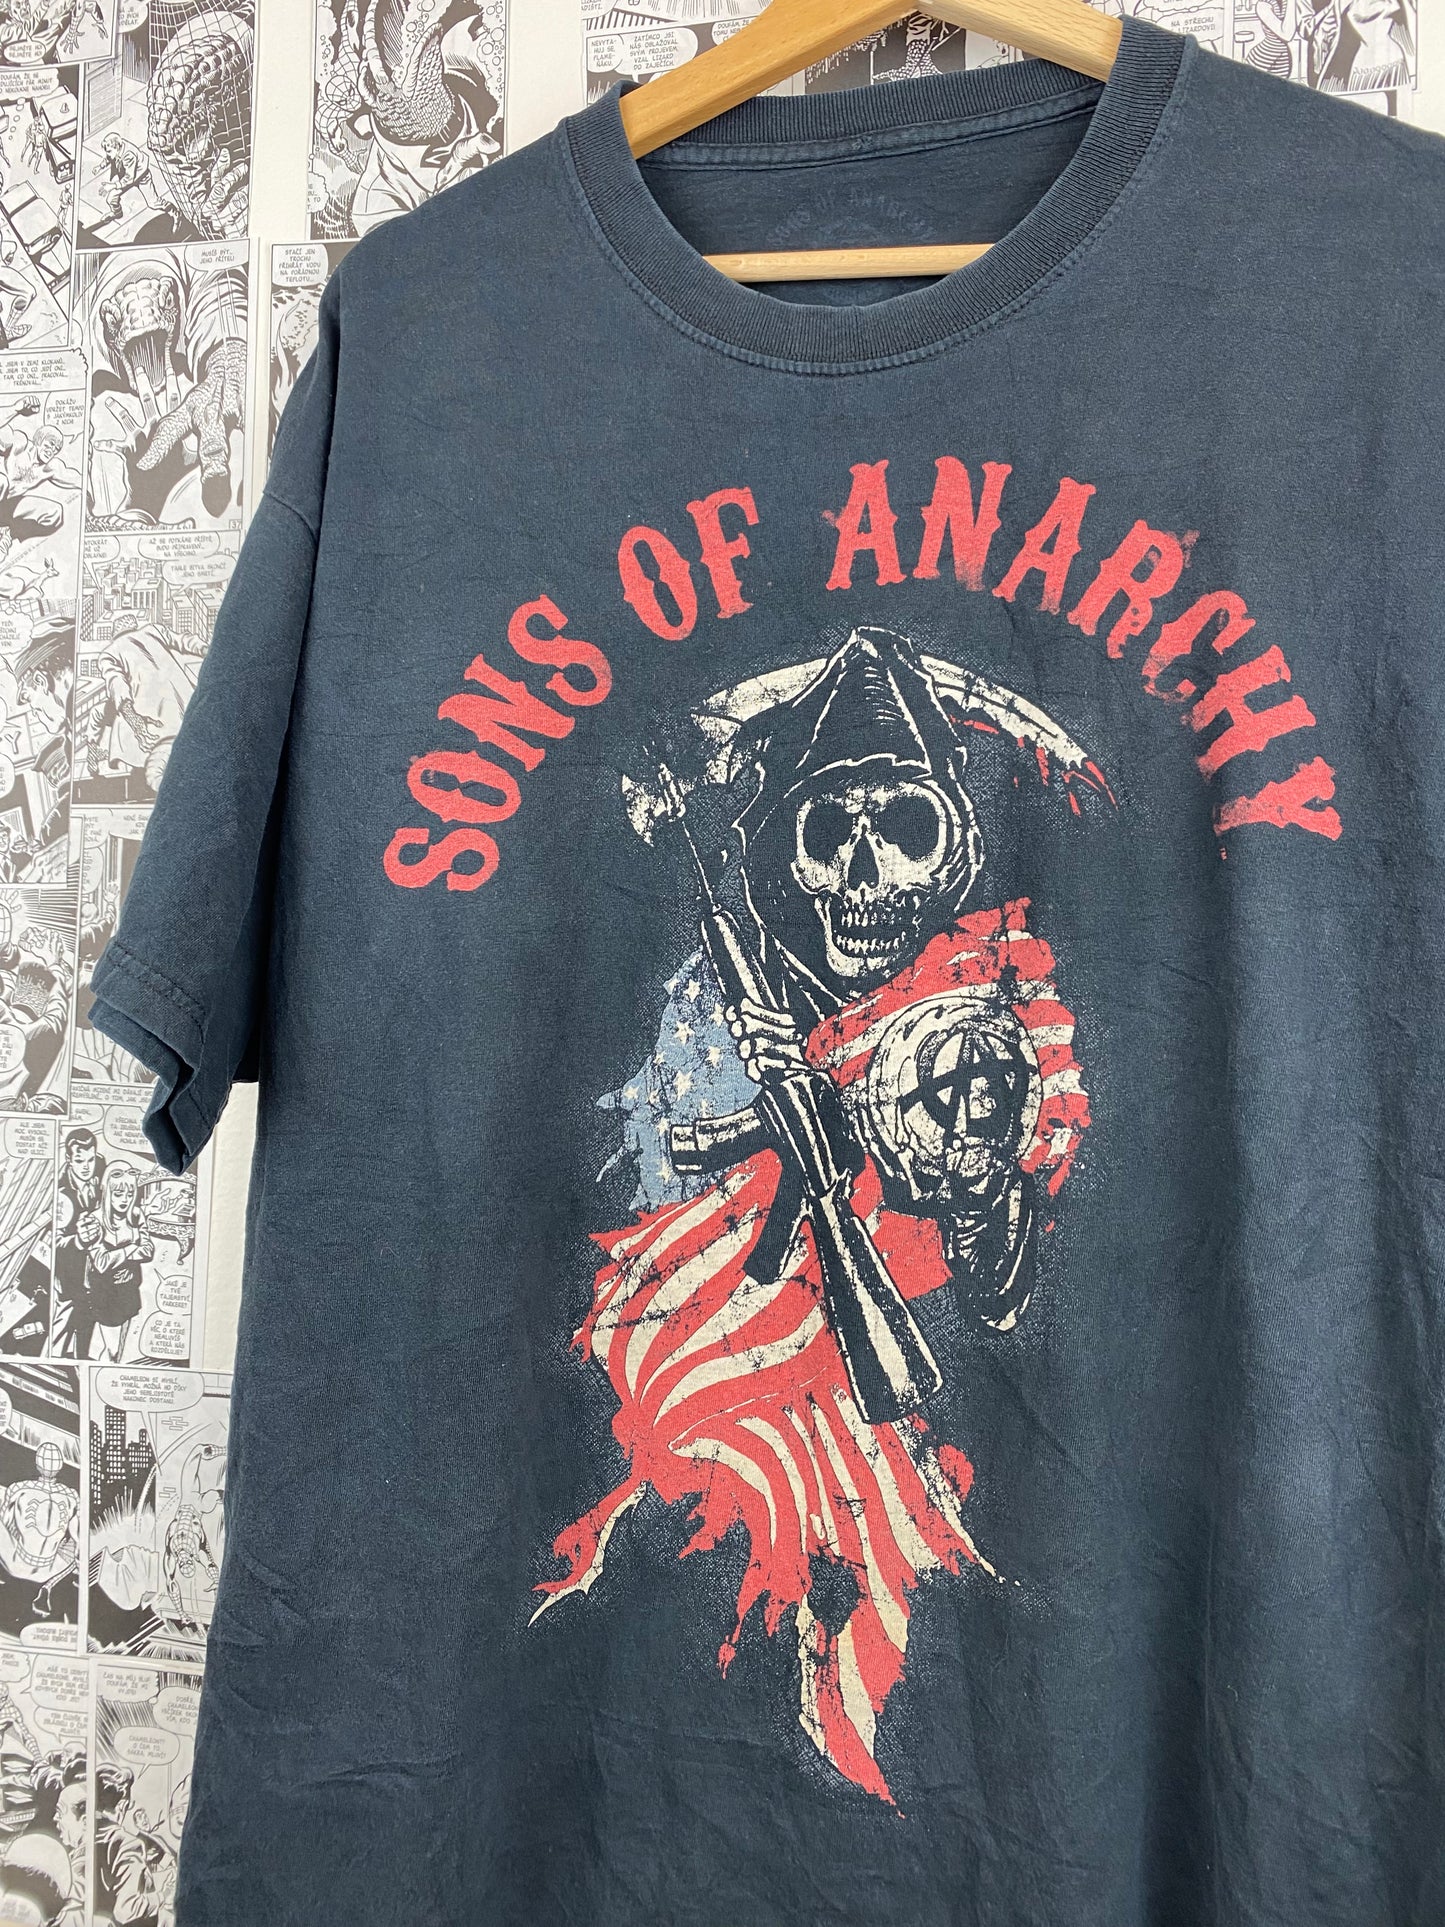 Sons of Anarchy t-shirt - size L